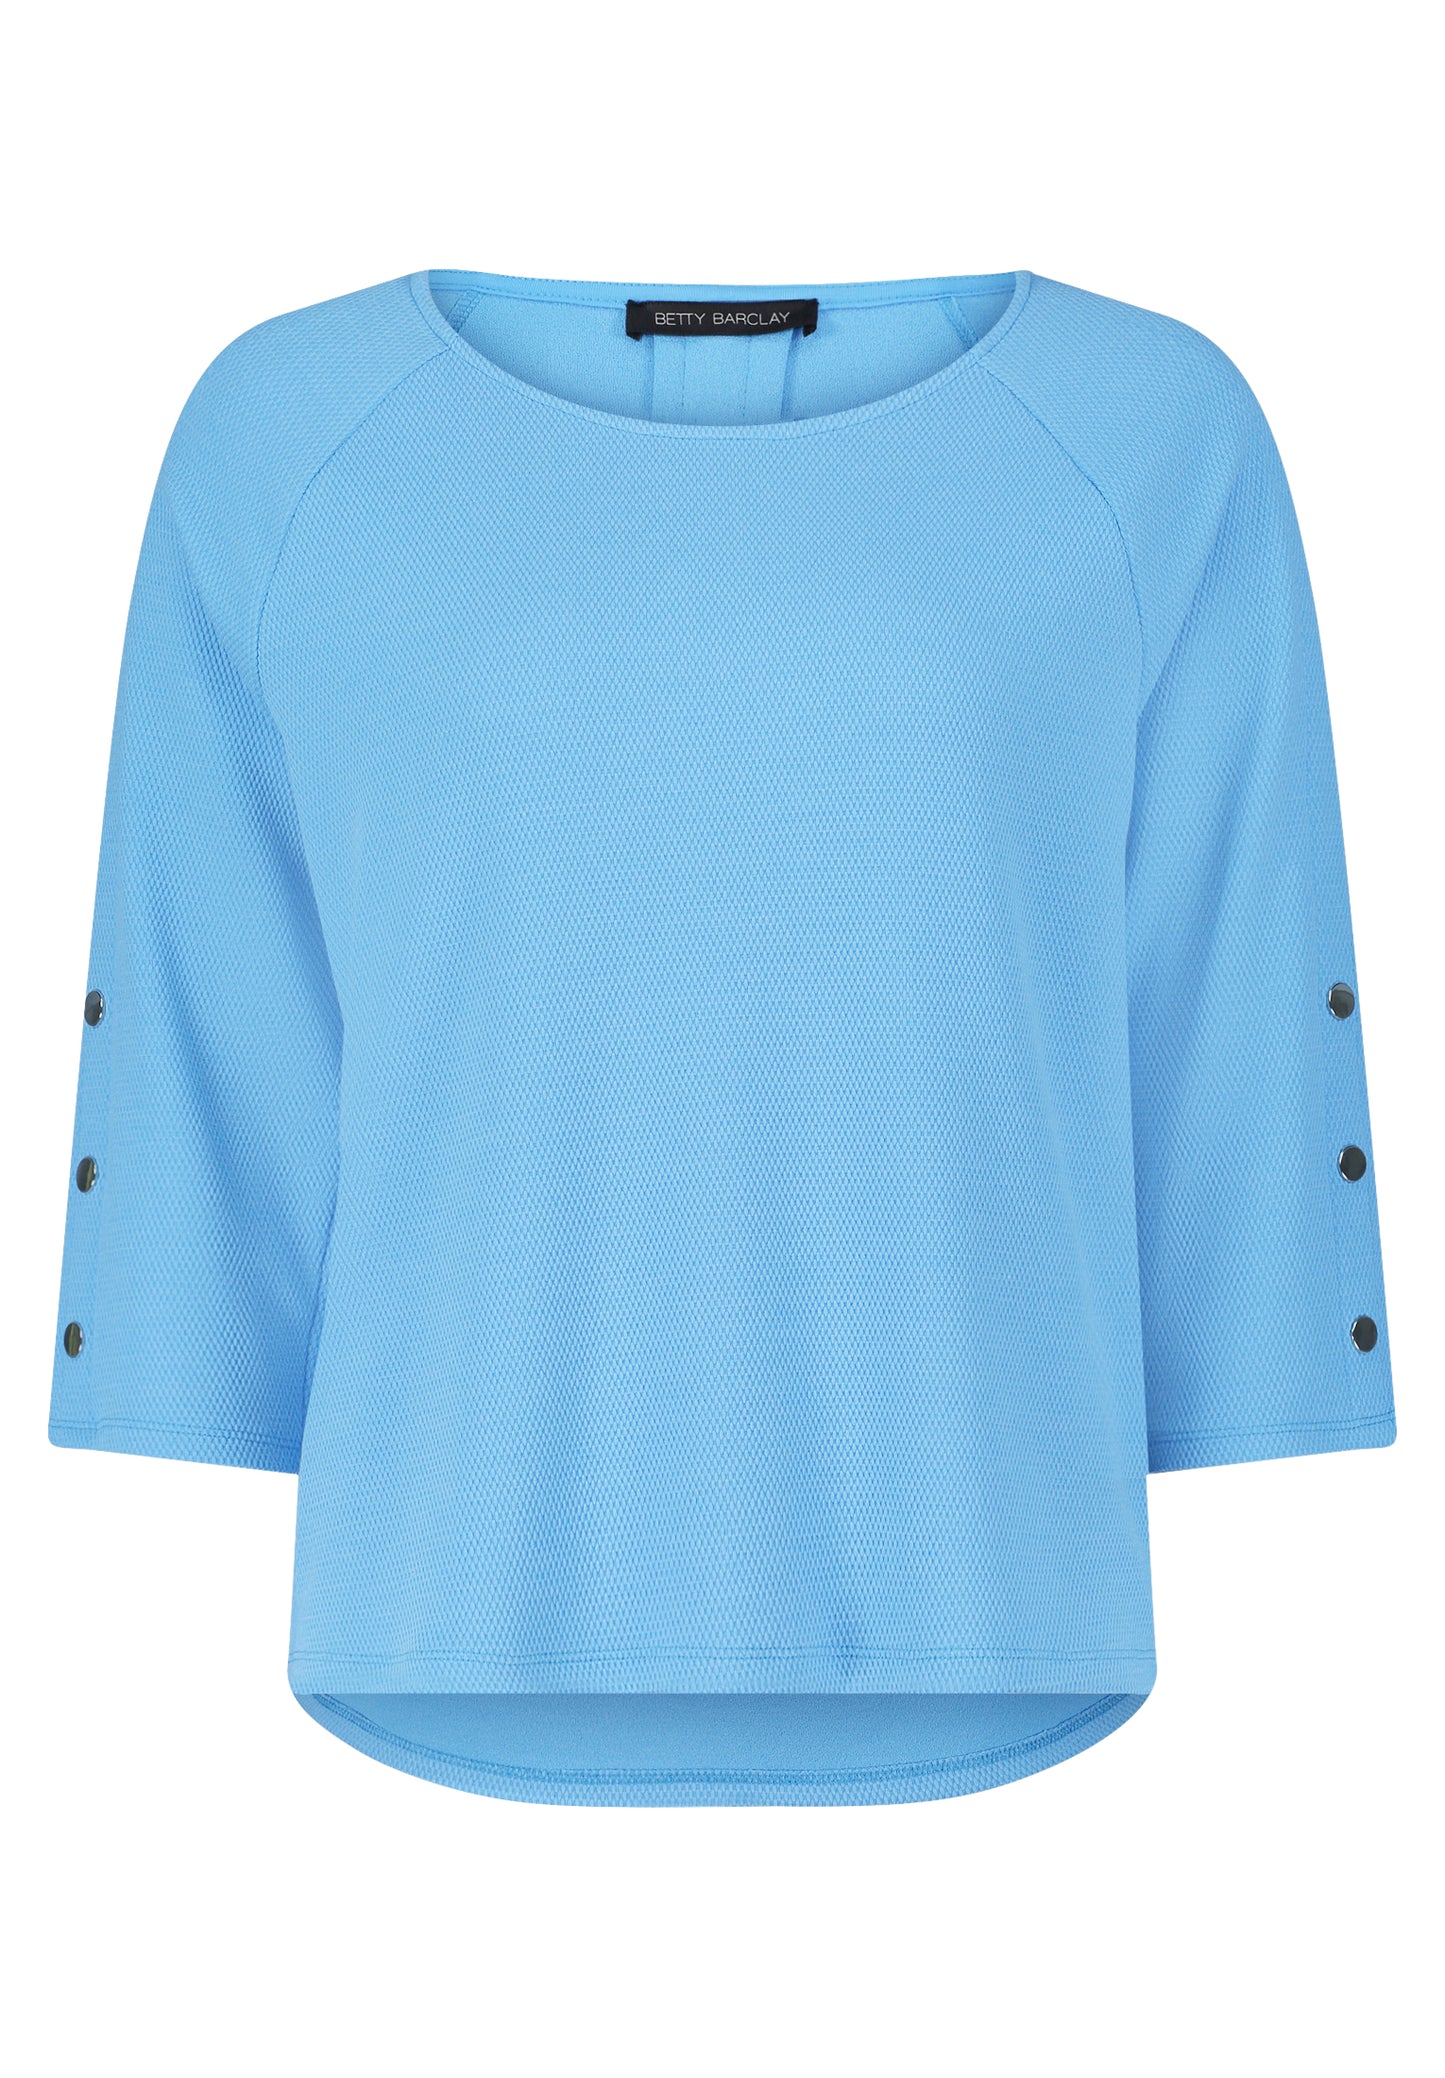 Betty Barclay Blue Jersey Top 2028/2451